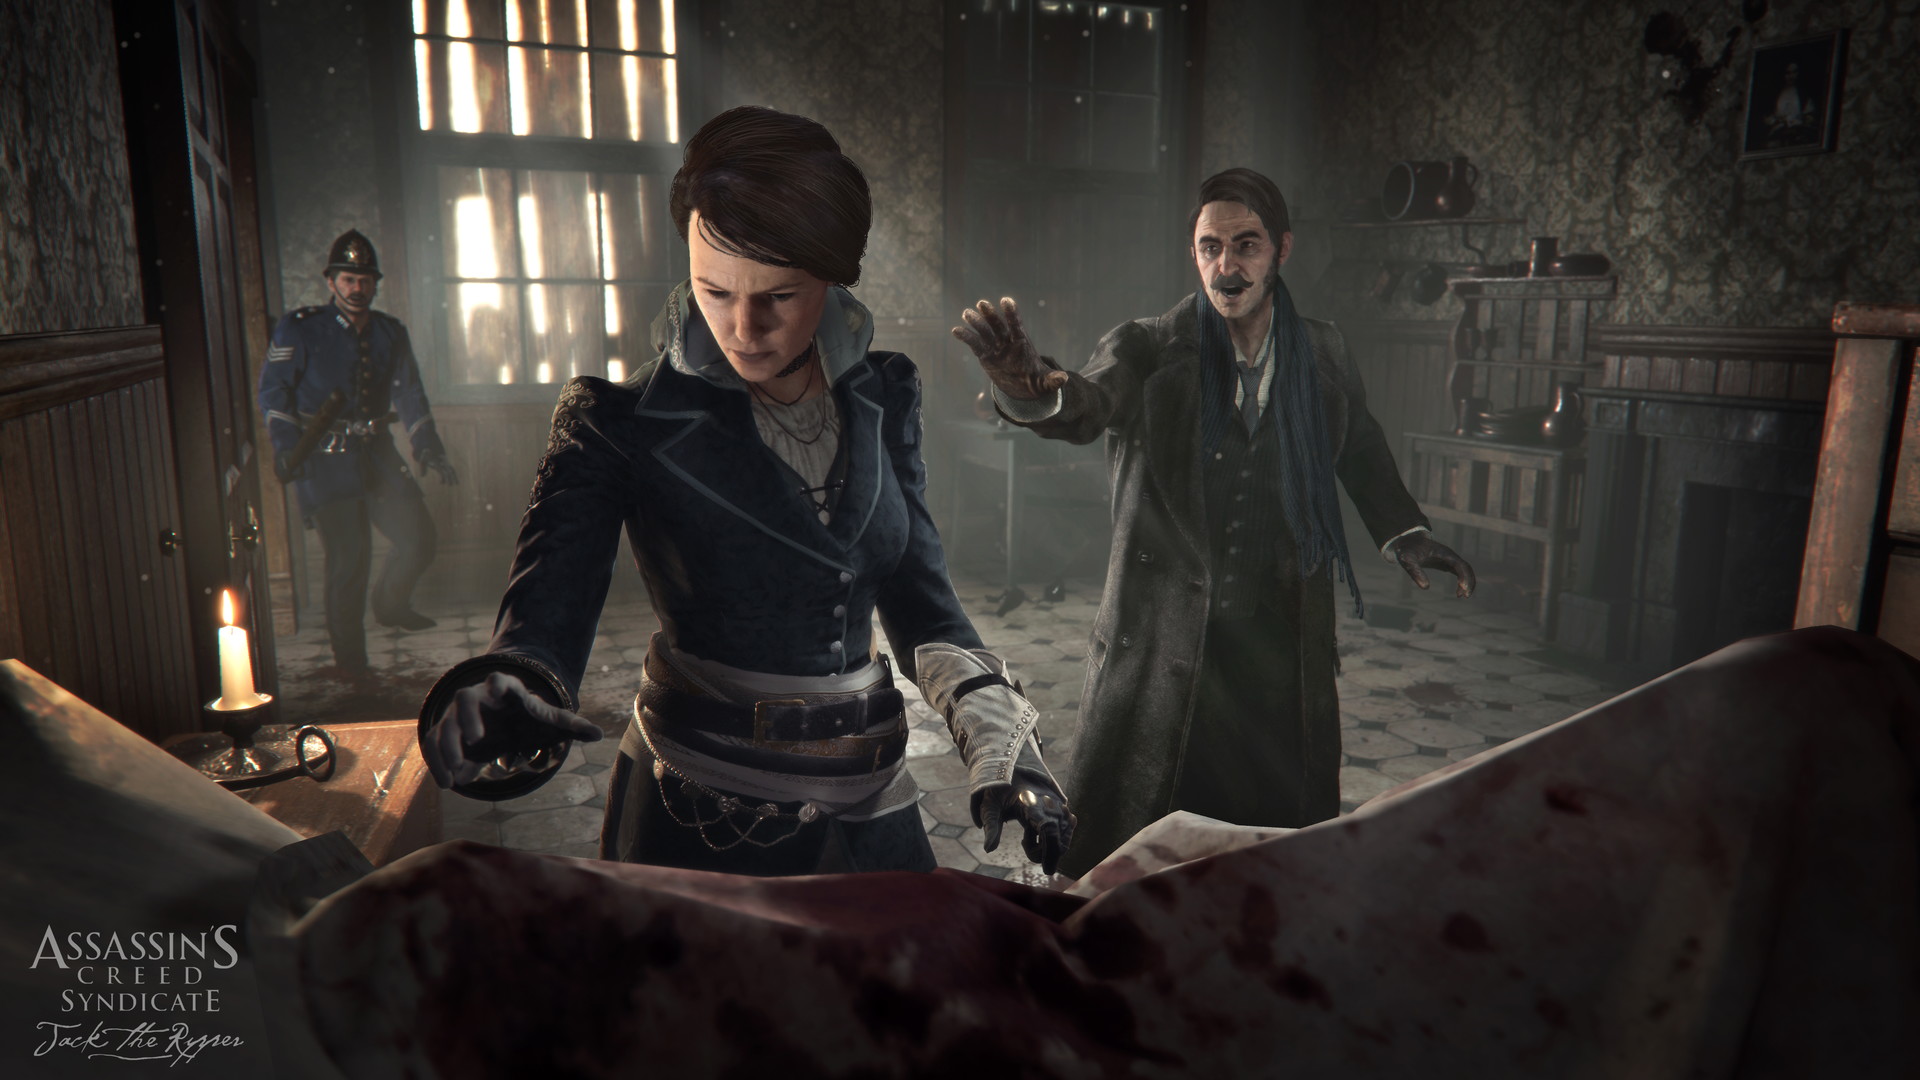 Assassin's Creed: Syndicate - Jack the Ripper - screenshot 2